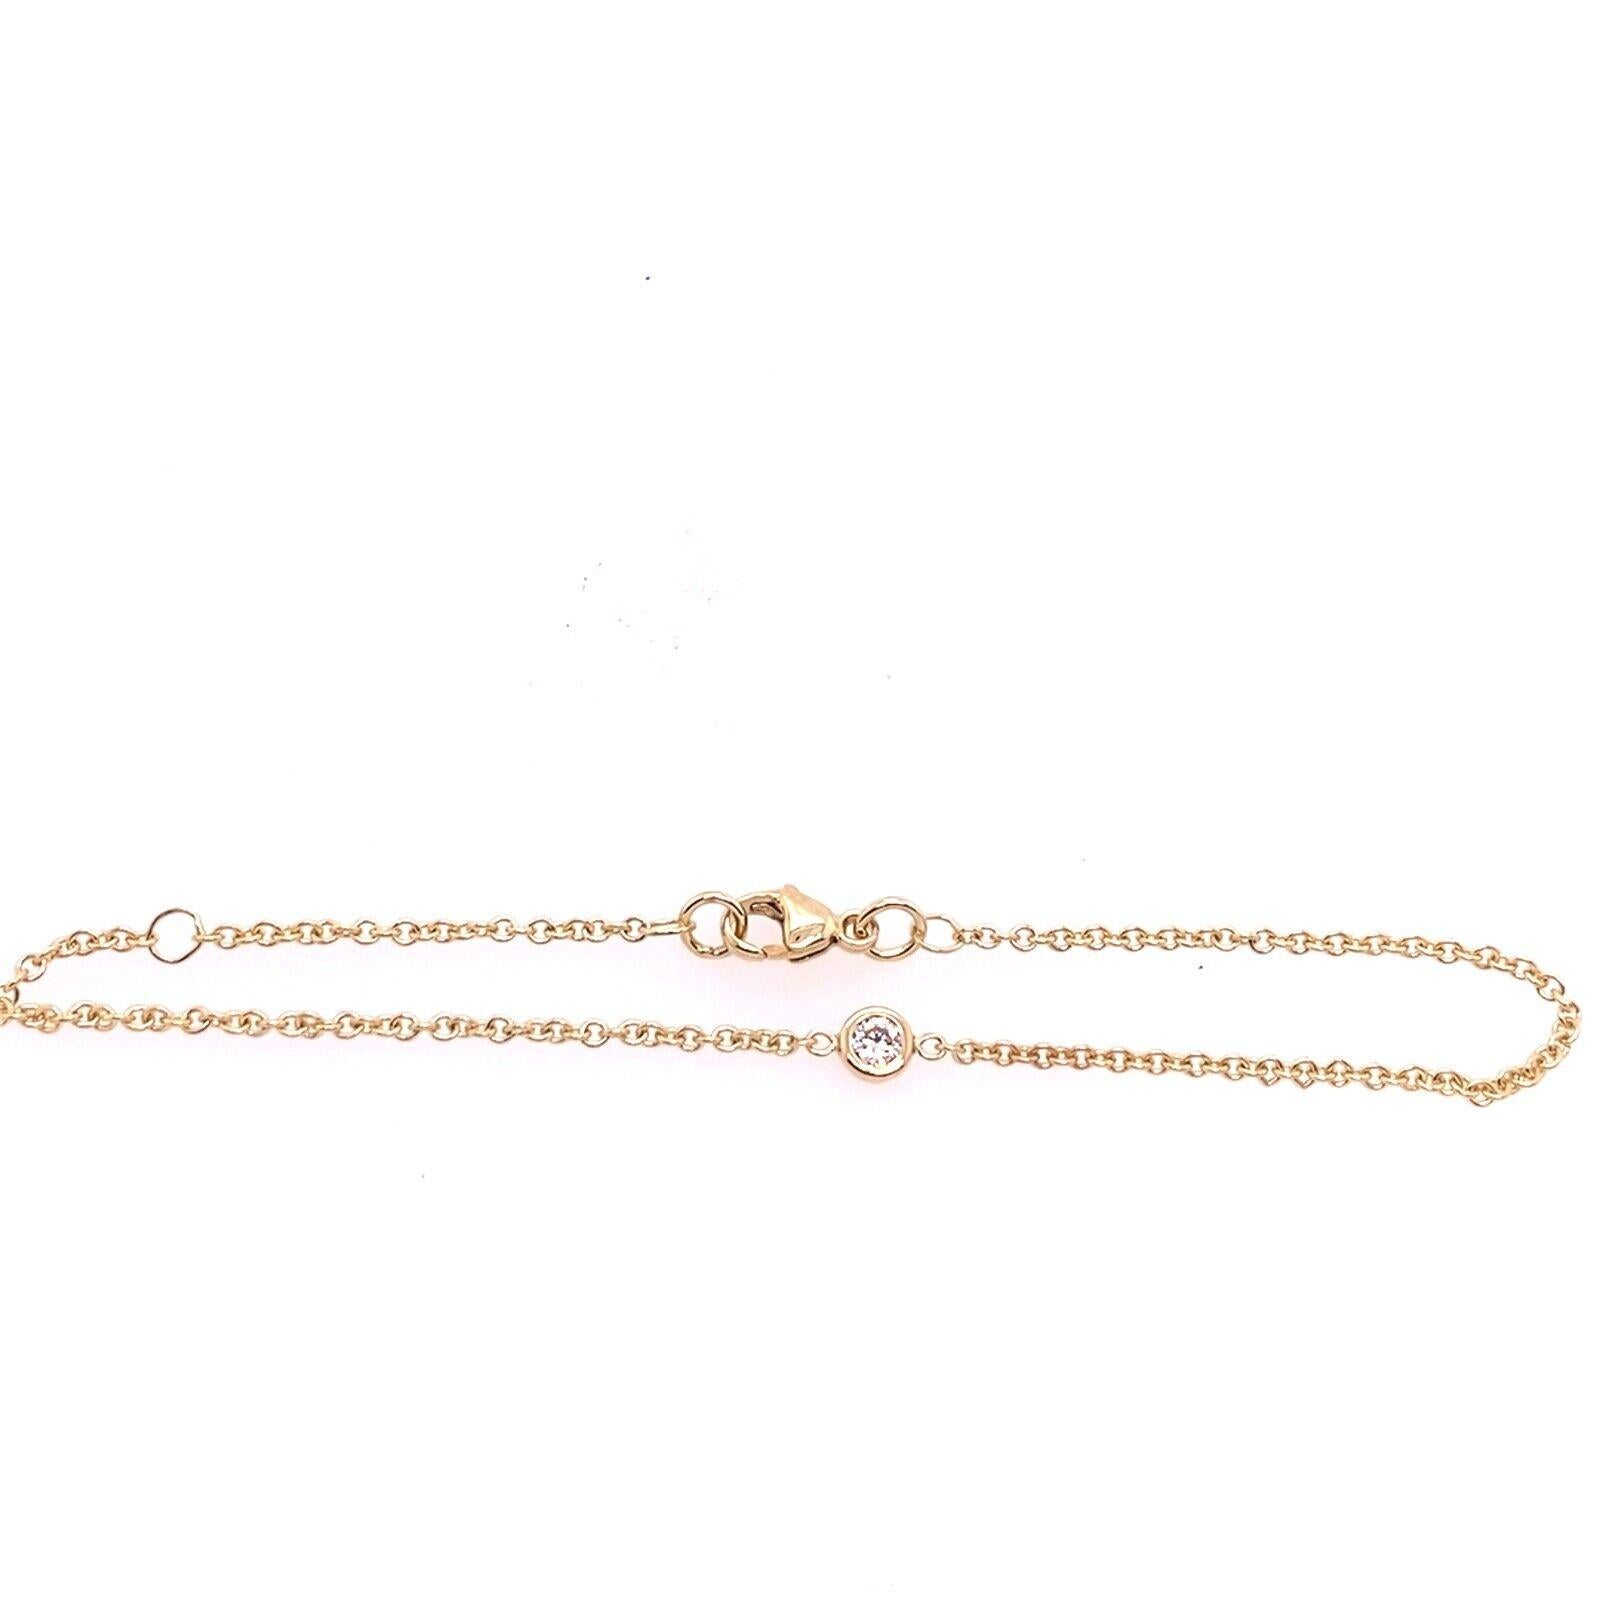 This April birthstone bracelet set, crafted in 9ct Yellow Gold is the perfect gift to celebrate one’s birth month. The bracelet comes with 1 round brilliant cut Diamond, which is the birthstone for April, and a lobster clasp for easy